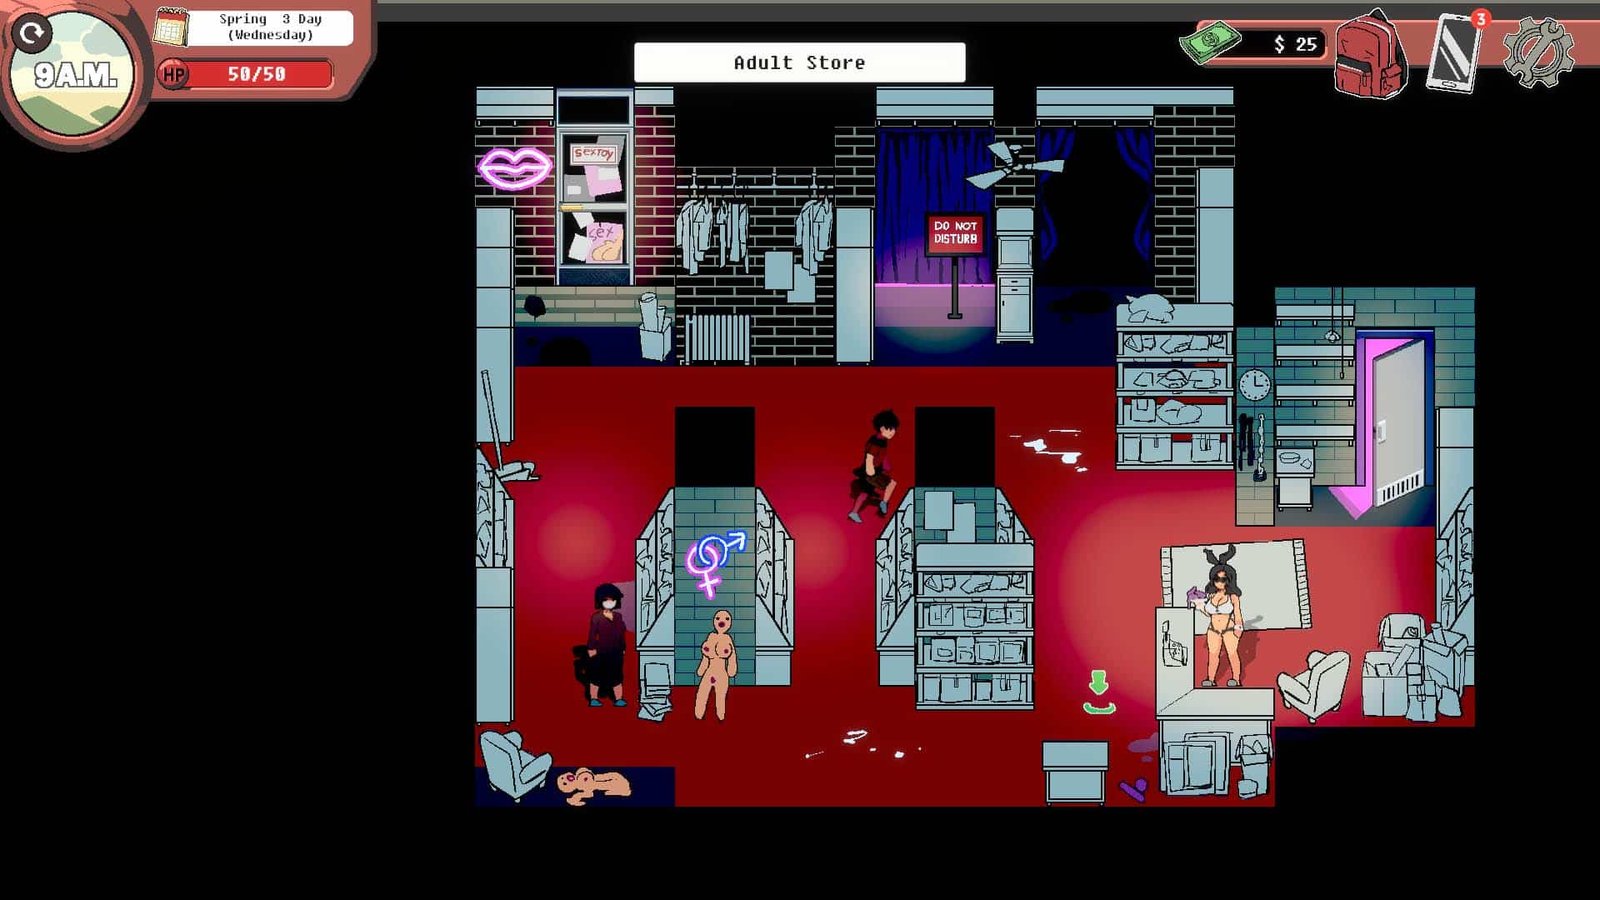 2D adult store in video game